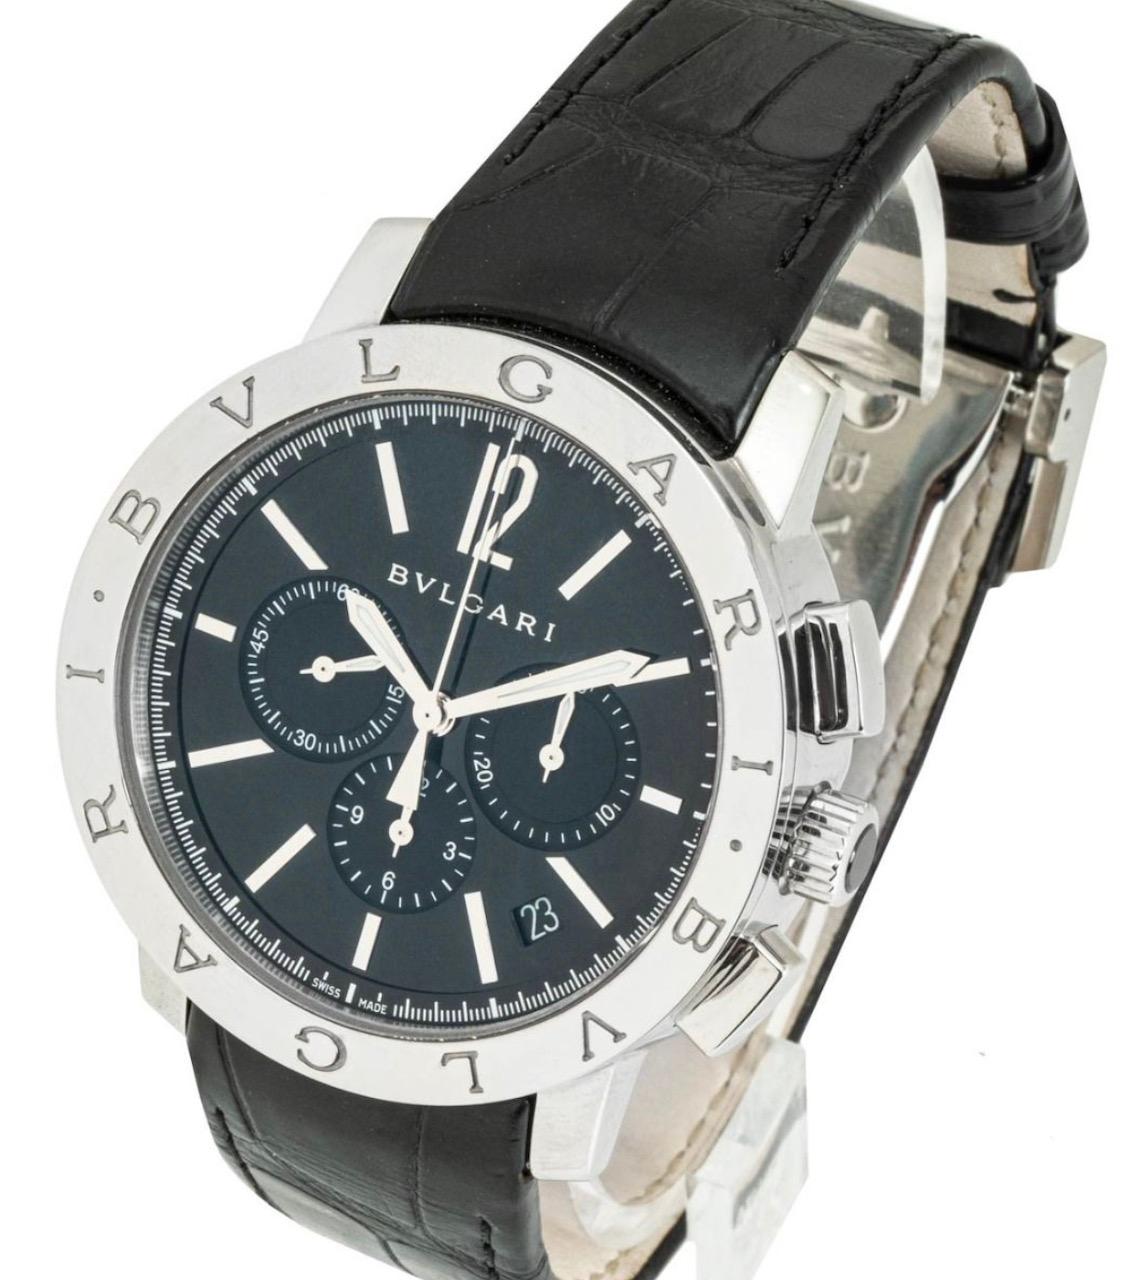 Bvlgari Chronograph 102043 Watch In Excellent Condition For Sale In London, GB